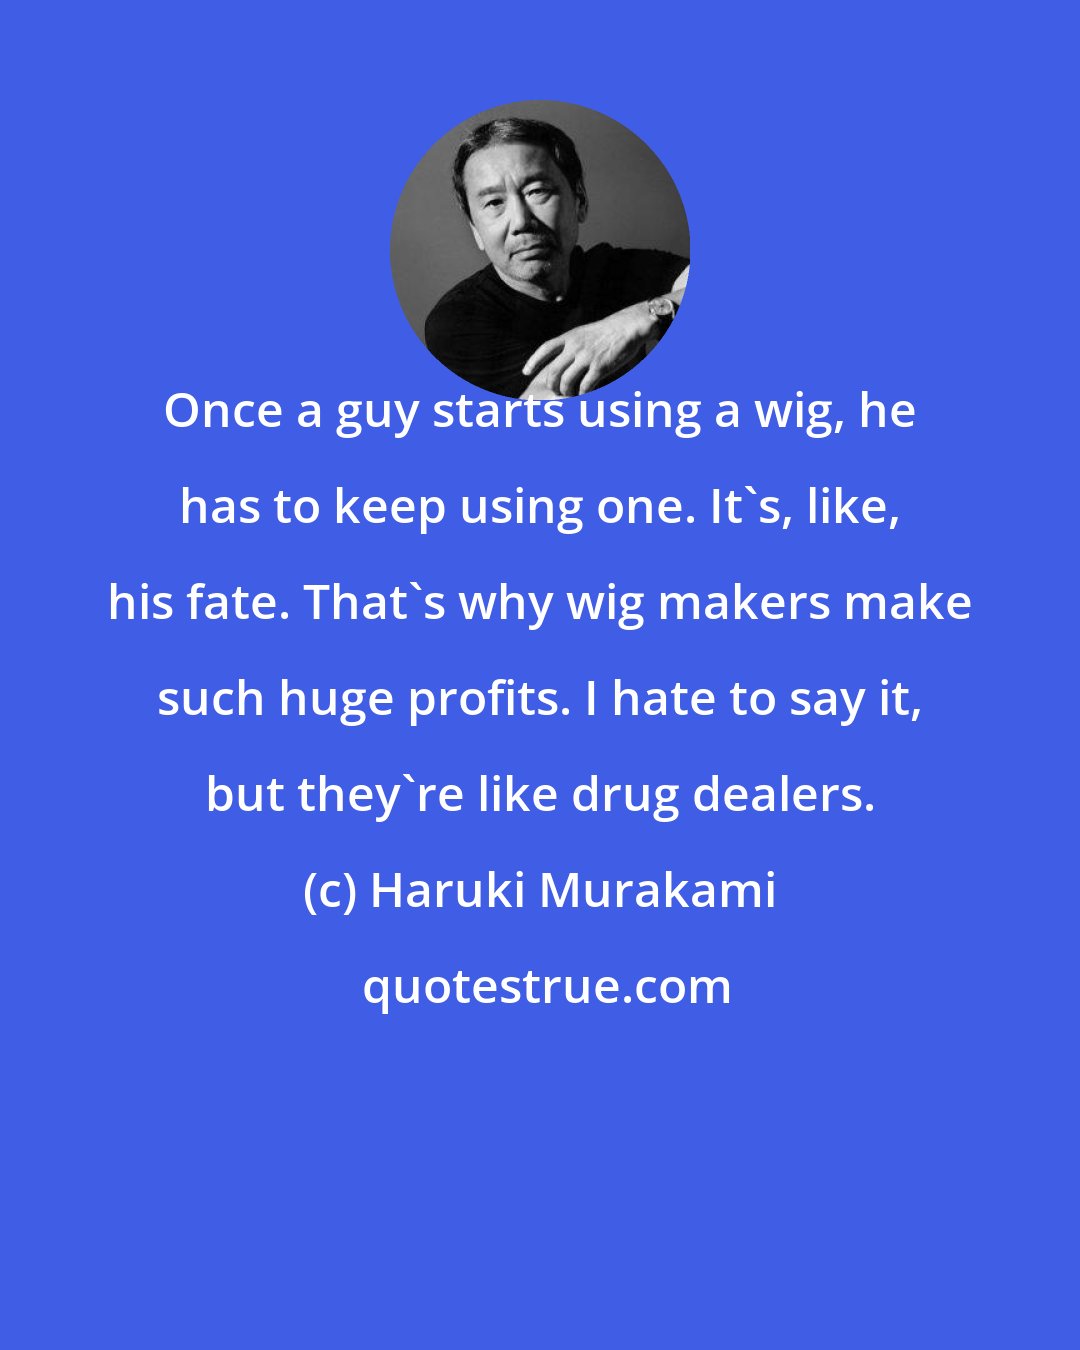 Haruki Murakami: Once a guy starts using a wig, he has to keep using one. It's, like, his fate. That's why wig makers make such huge profits. I hate to say it, but they're like drug dealers.